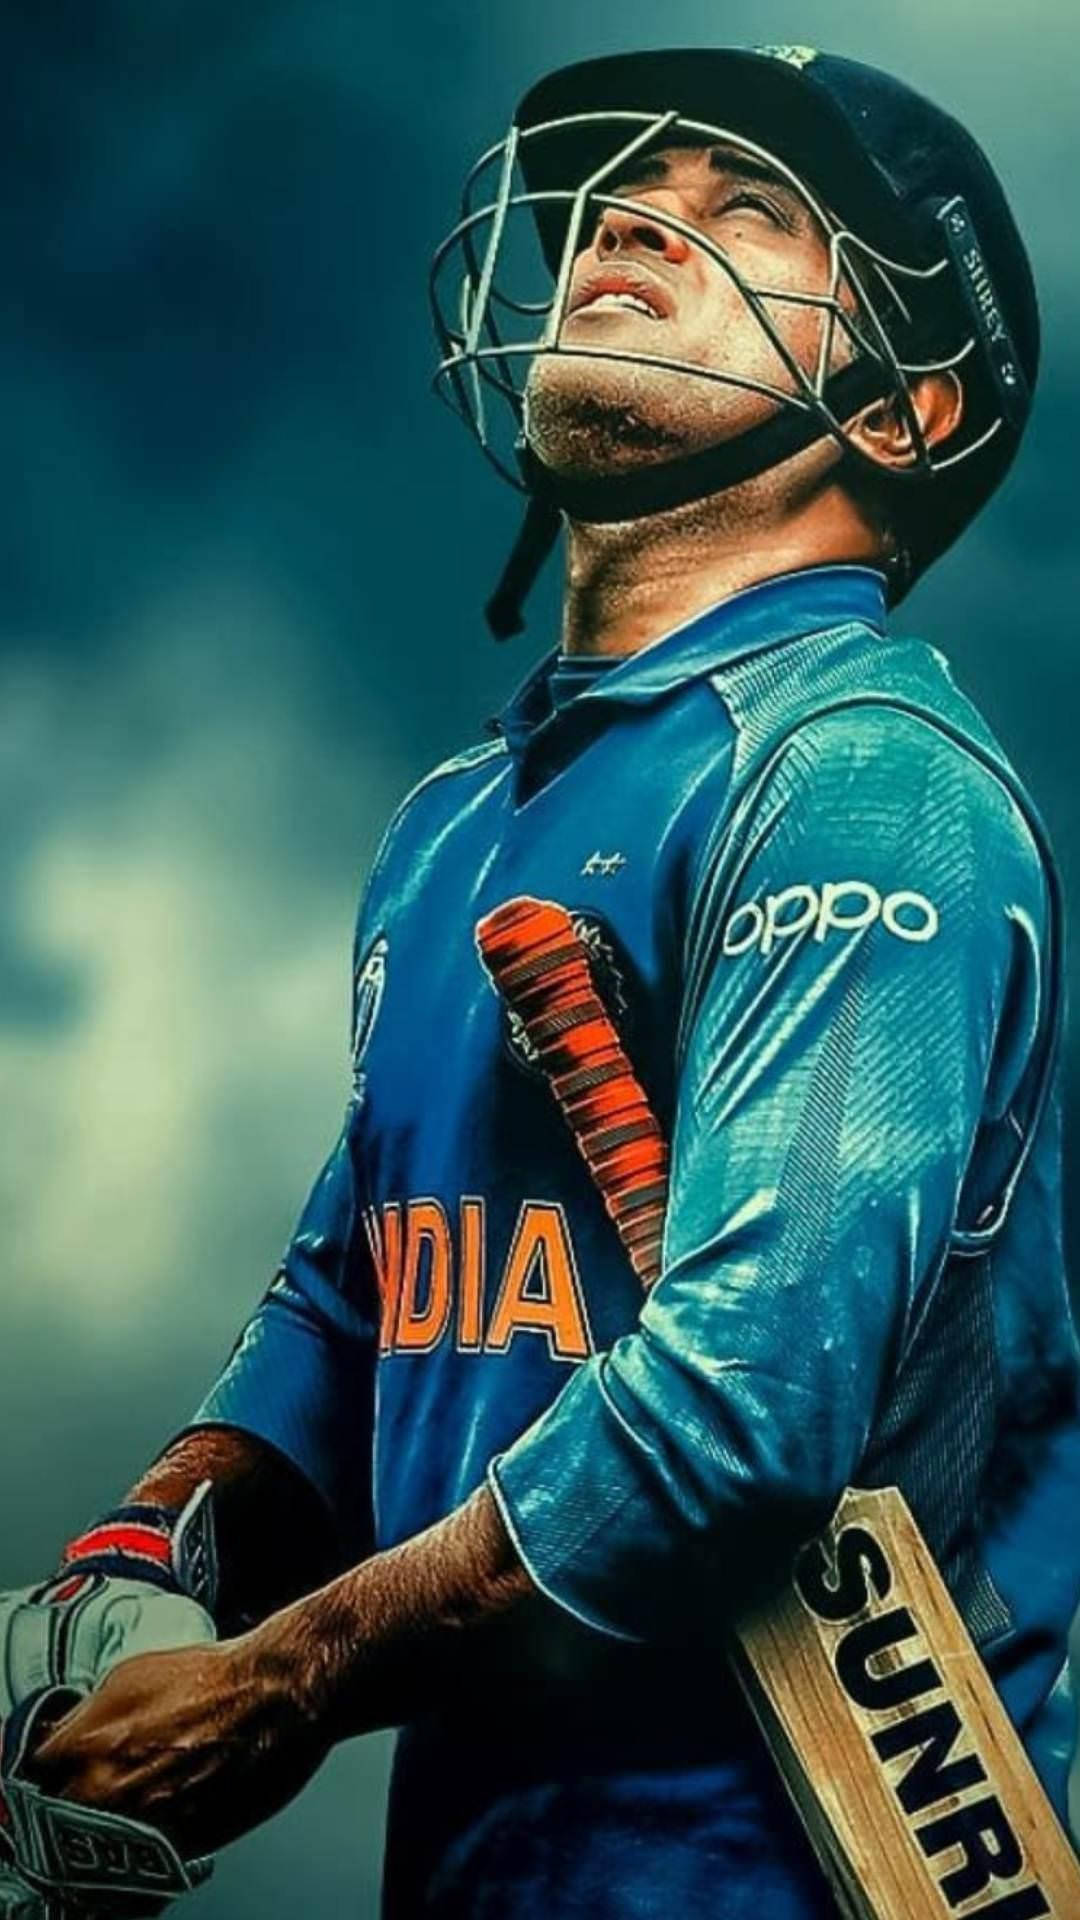 The Legendary Indian Cricket Player, Ms Dhoni On Field Background